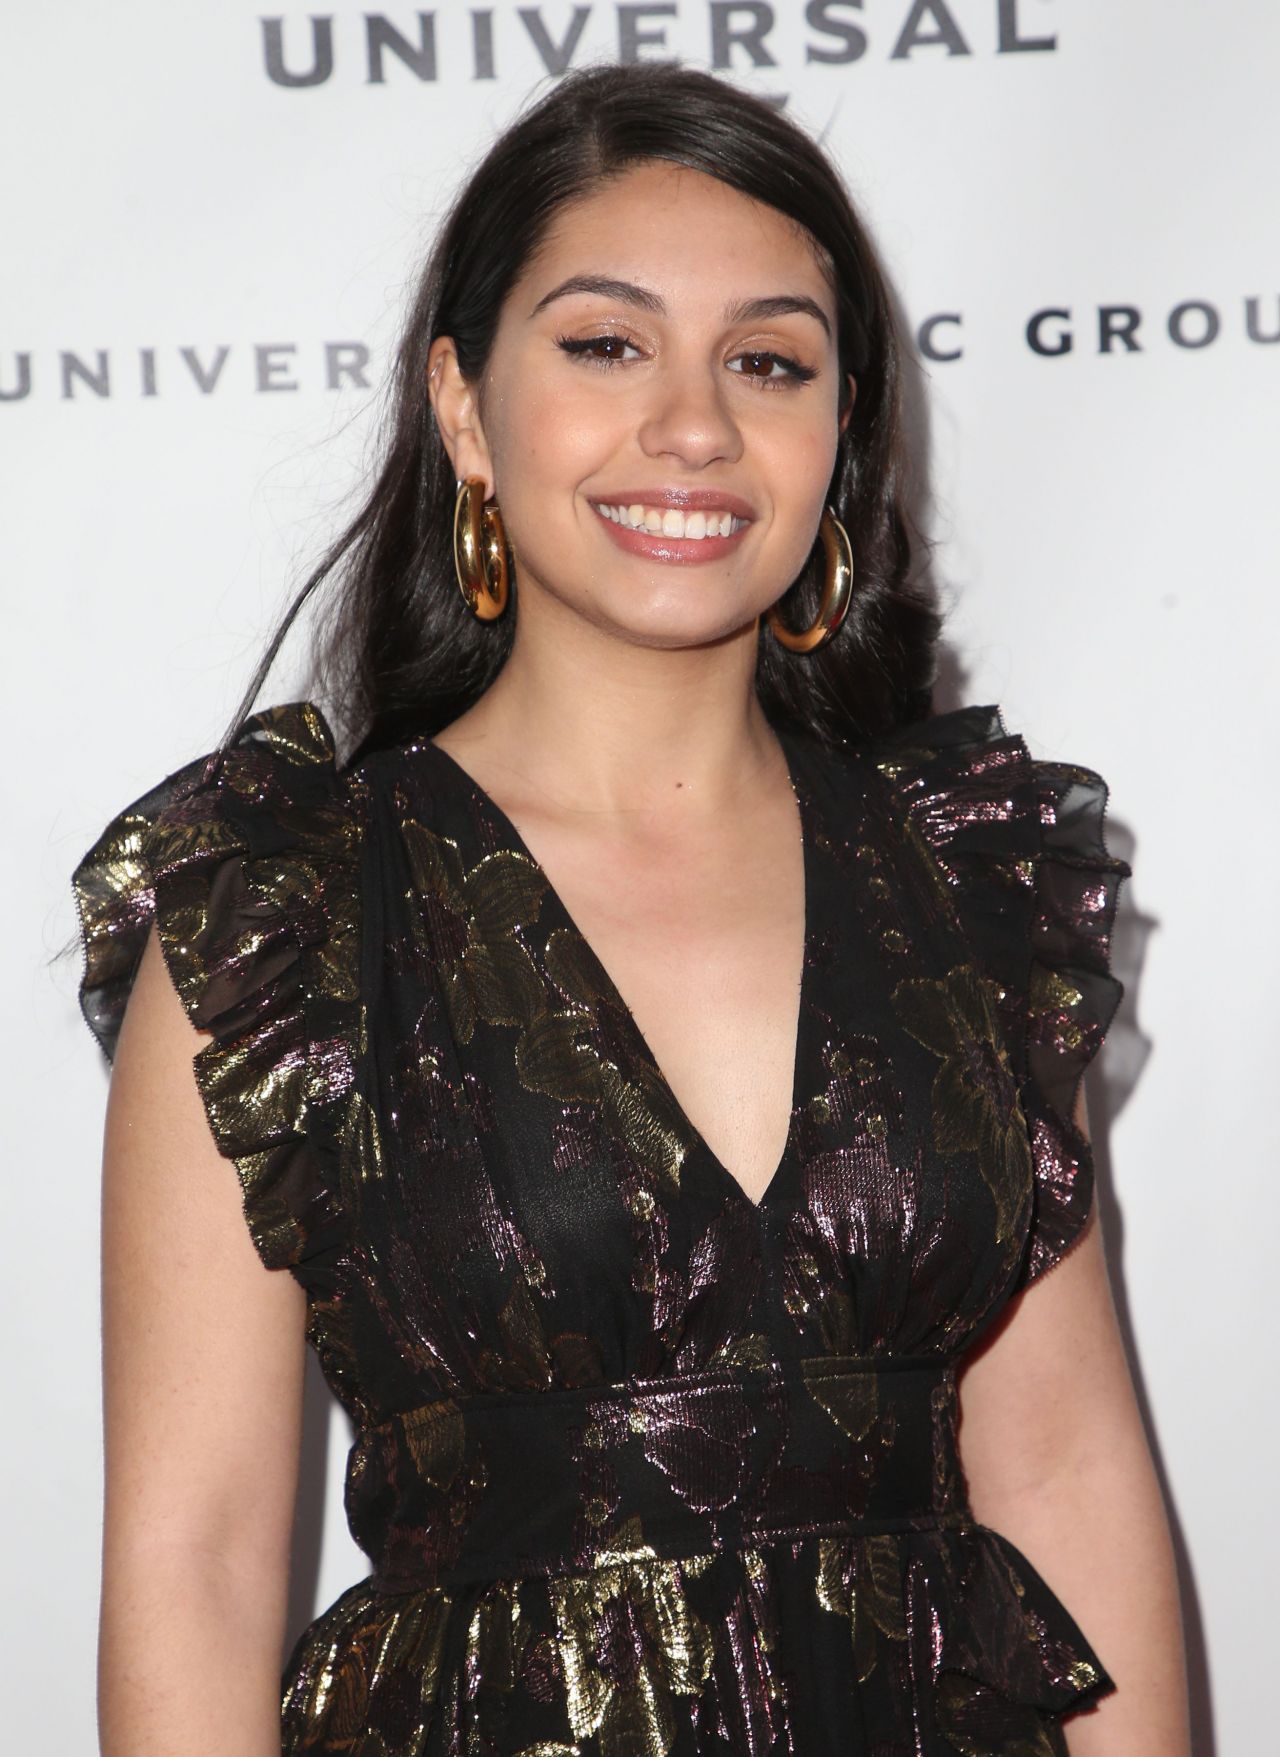 alessia-cara-universal-music-group-grammy-after-party-02-10-2019-3.jpg